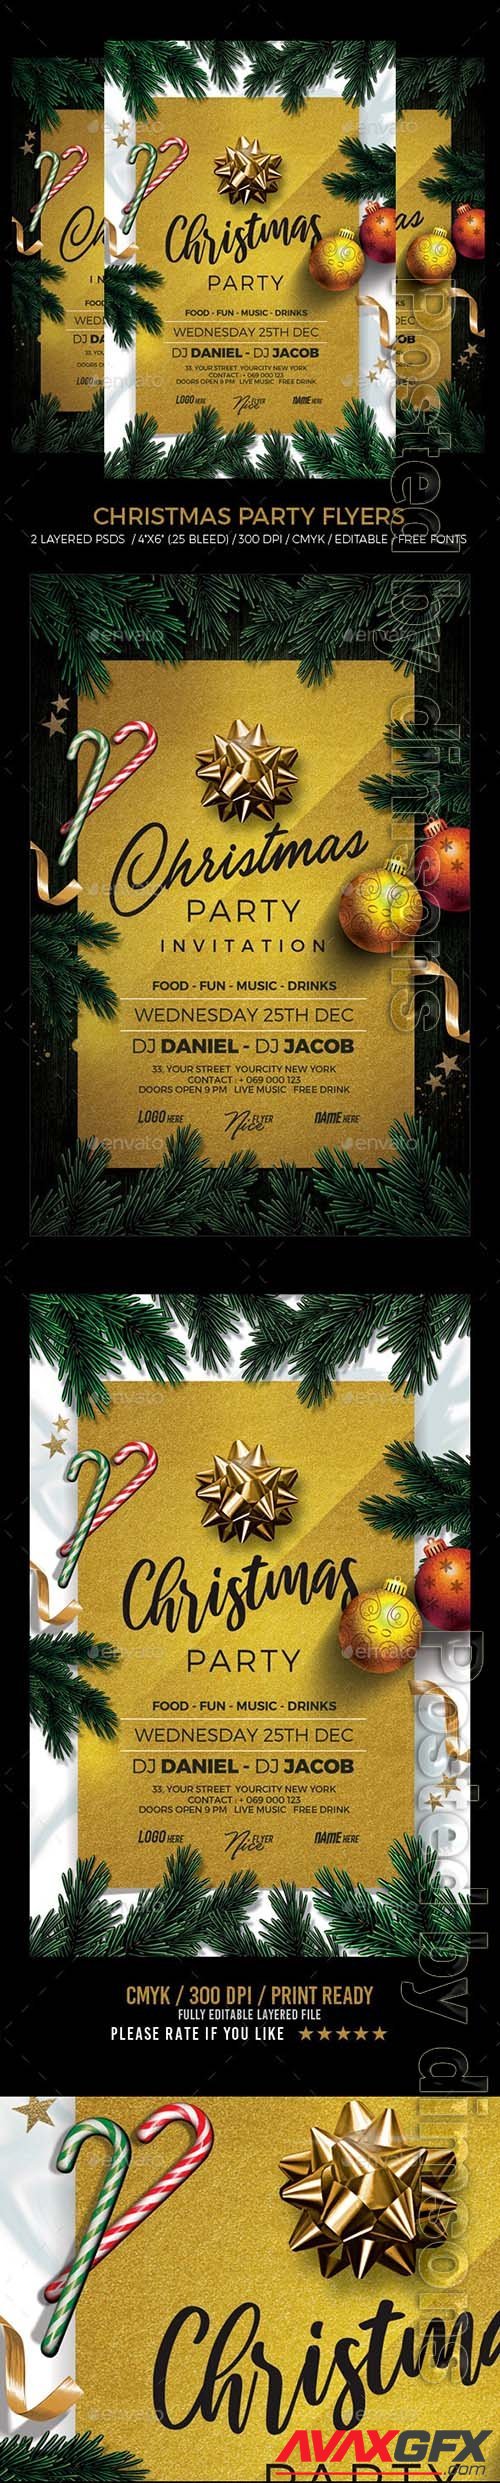 Graphicriver - Christmas Party 25091776